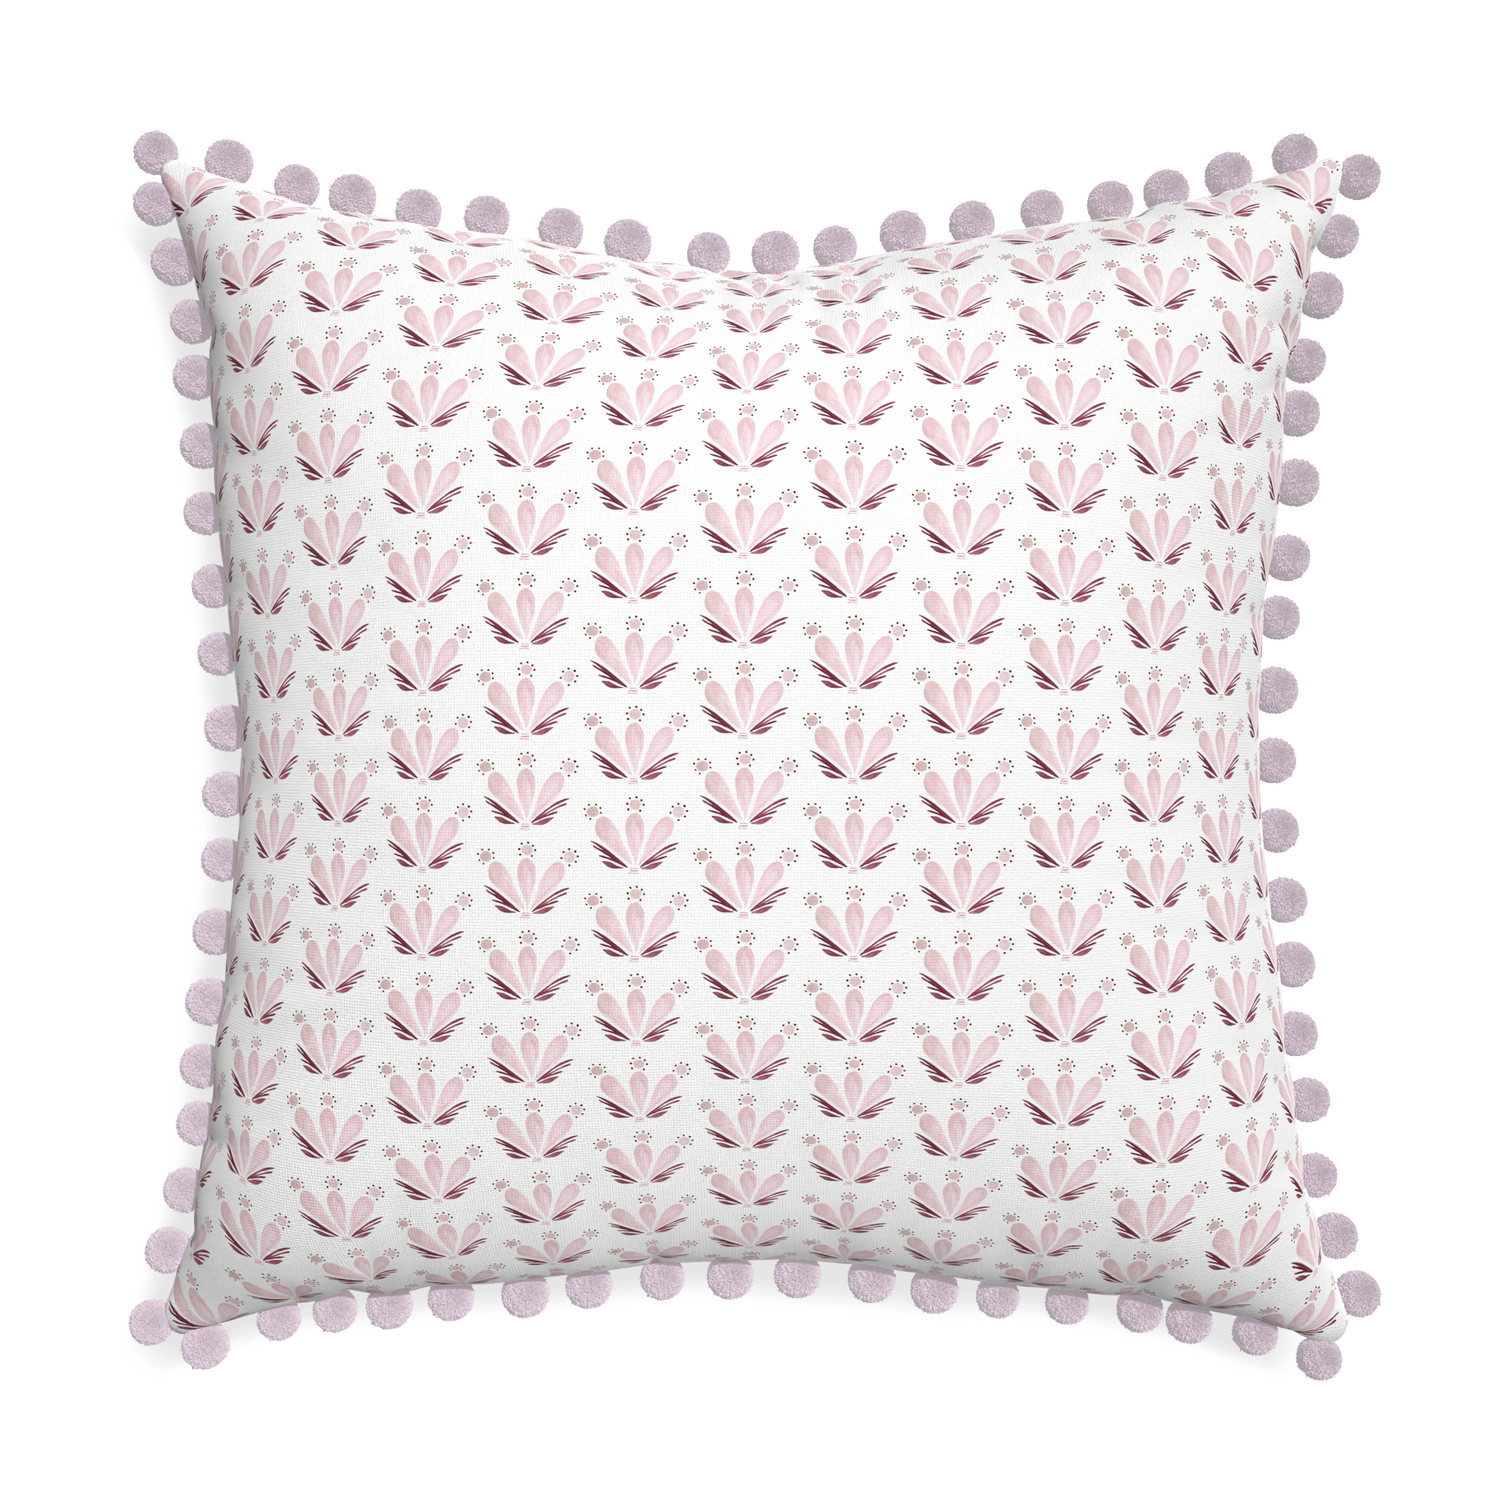 Euro-sham serena pink custom pillow with l on white background